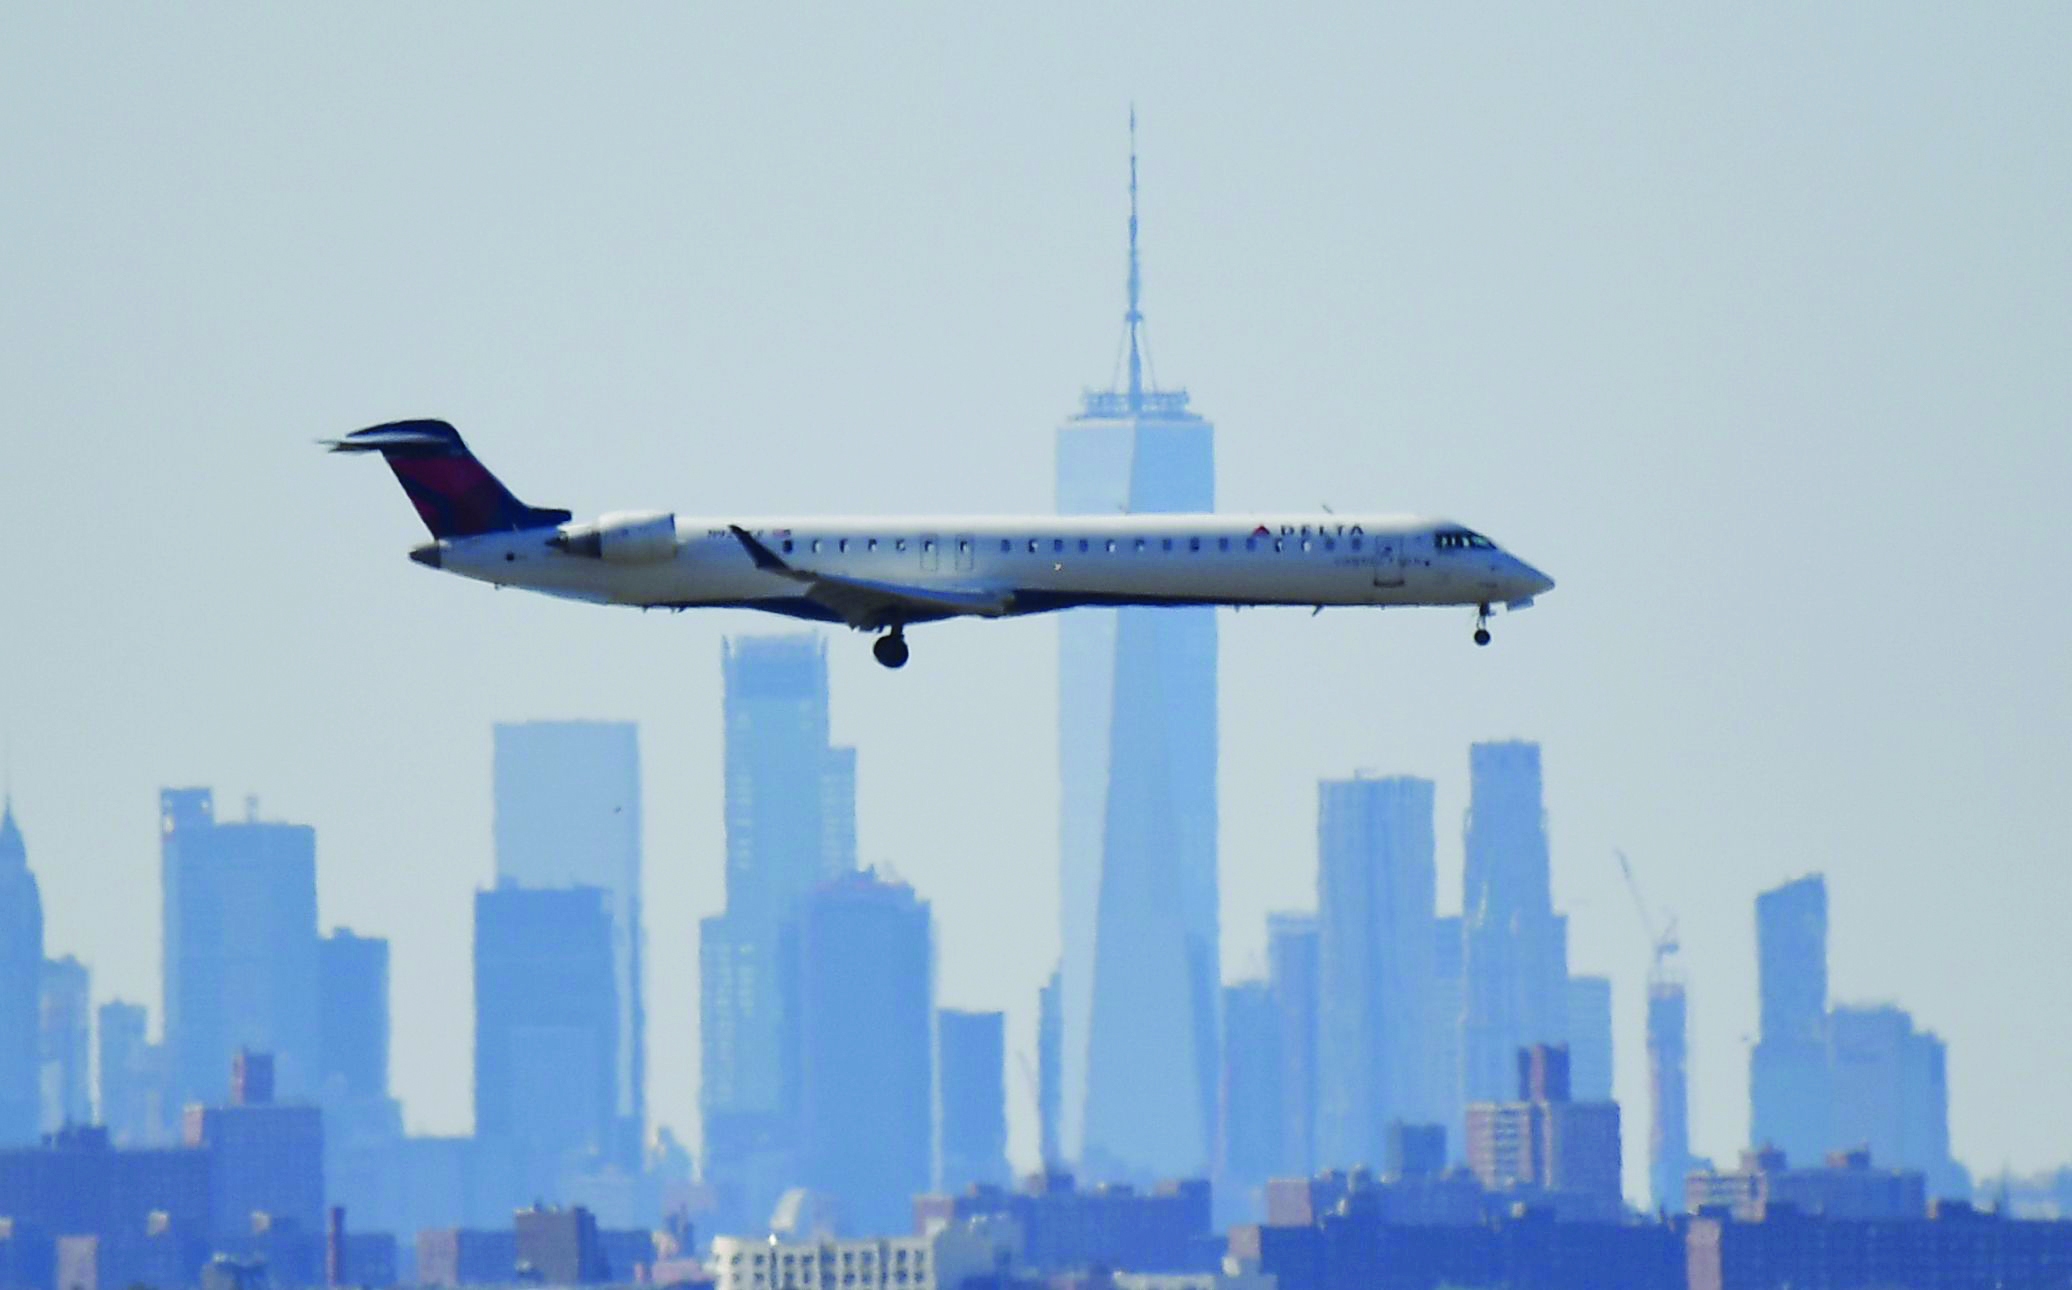 A plane from Delta airline is seen above the skyline of Manhattan before it lands at JFK airport on March 15, 2020 in New York City. - Chaos gripped major US airports Sunday as Americans returning from coronavirus-hit European countries overwhelmed authorities attempting to process the surge.Frustrated passengers complained of hours-long lines, crowded and unsanitary conditions and general disarray in the system for screening people for symptoms of the virus.Chaos gripped major US airports Sunday as Americans returning from coronavirus-hit European countries overwhelmed authorities attempting to process the surge. Frustrated passengers complained of hours-long lines, crowded and unsanitary conditions and general disarray in the system for screening people for symptoms of the virus. Schools, museums, sports arenas and entertainment venues have closed in some states, but St. Patrick's Day celebrations still filled bars and restaurants over the weekend, leading some local officials to consider more extensive shutdowns. (Photo by Johannes EISELE / AFP)